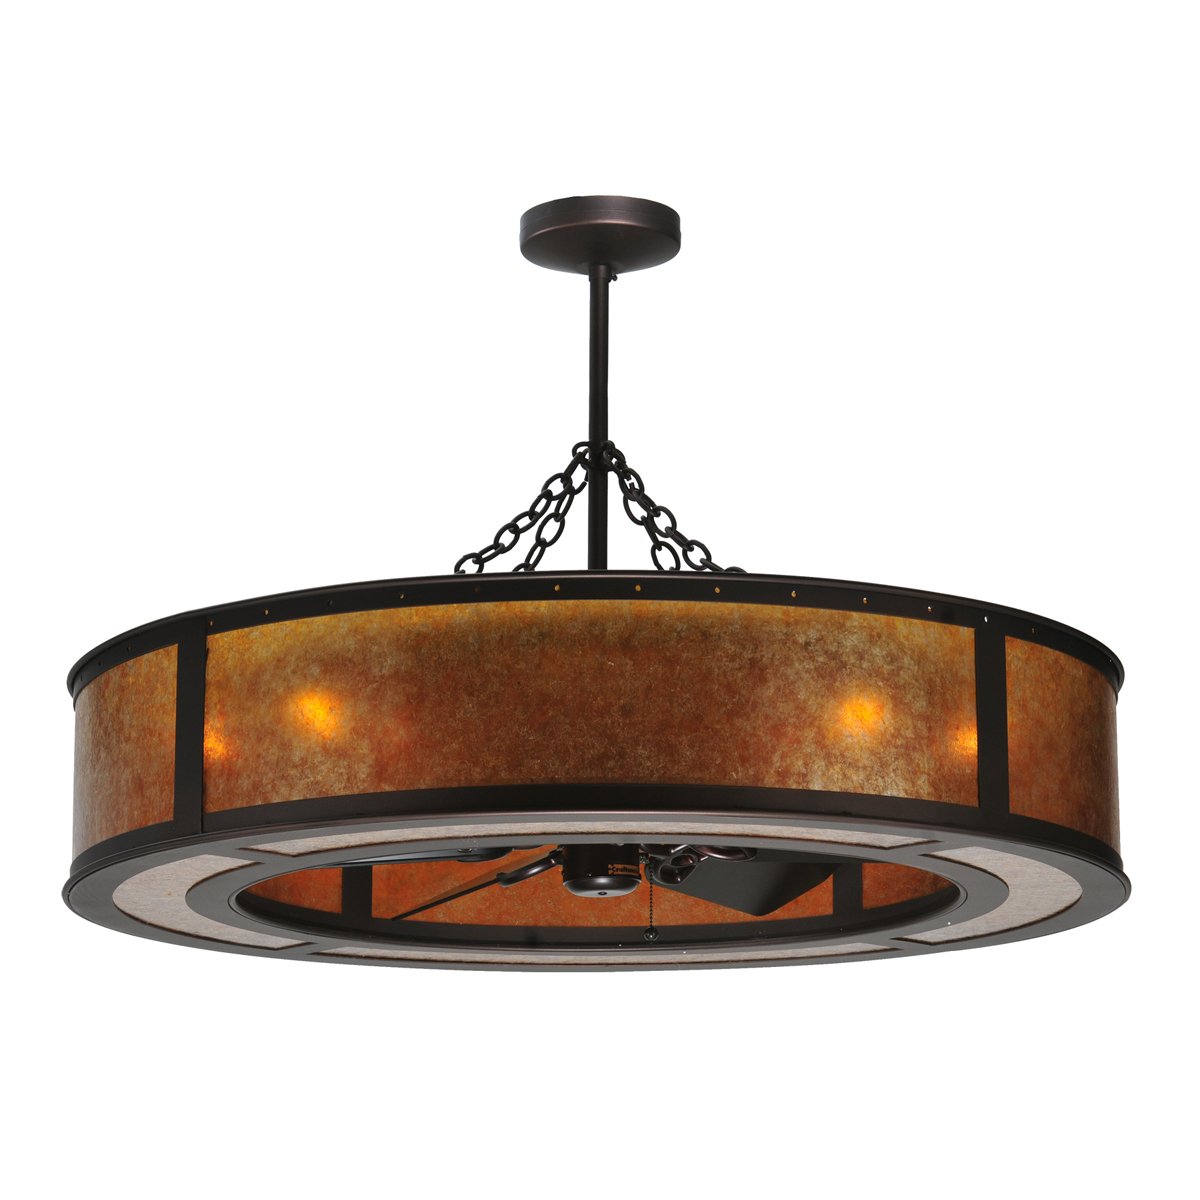 Craftsman style ceiling light - illuminate entire rooms with minimal